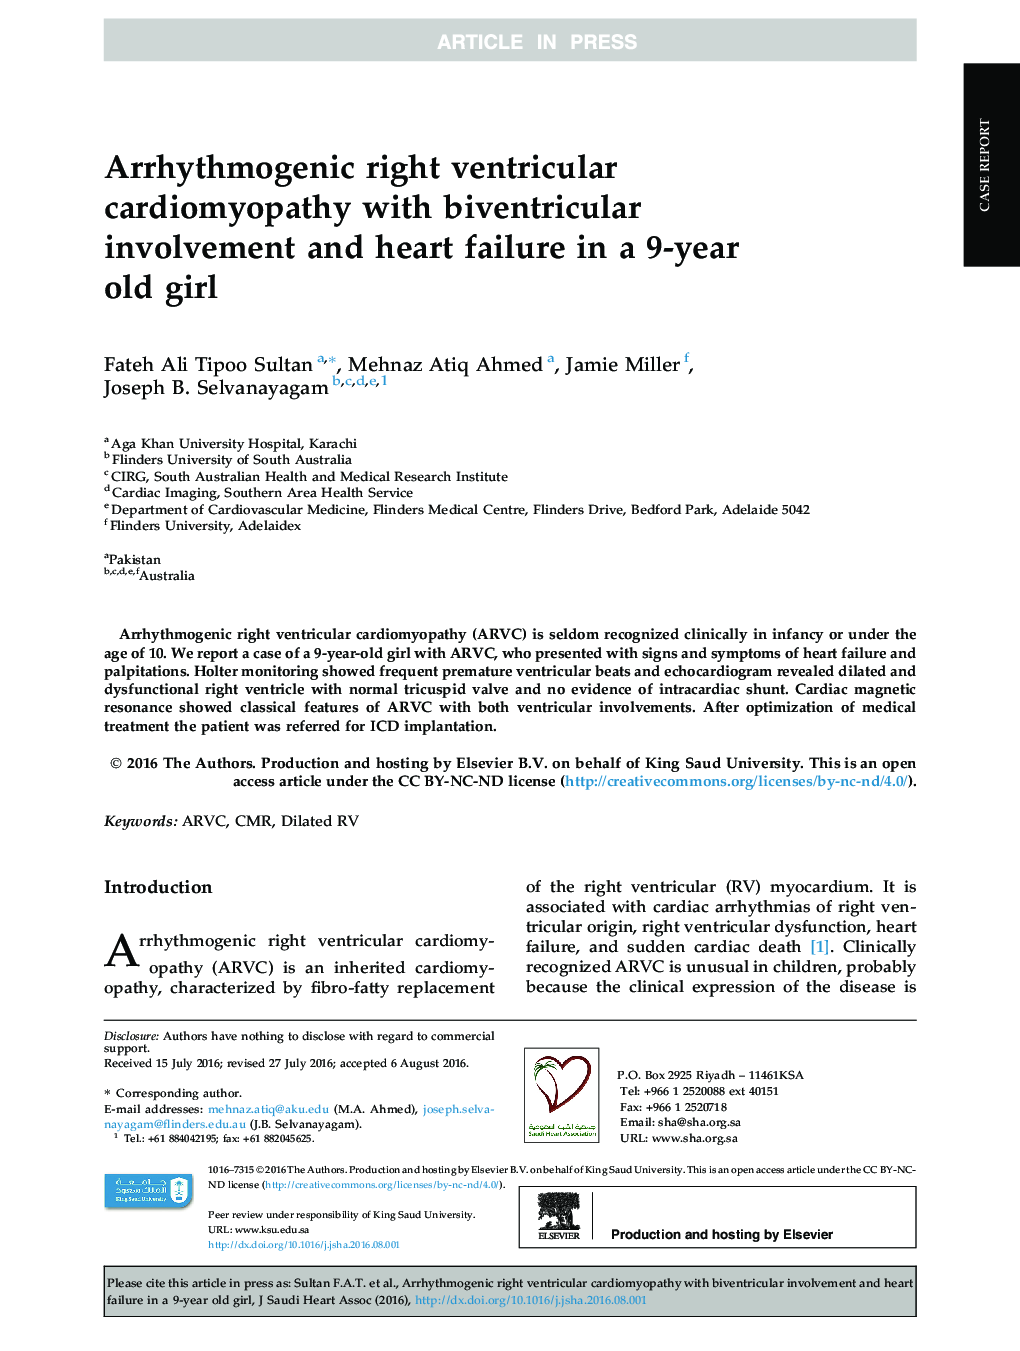 Arrhythmogenic right ventricular cardiomyopathy with biventricular involvement and heart failure in a 9-year old girl